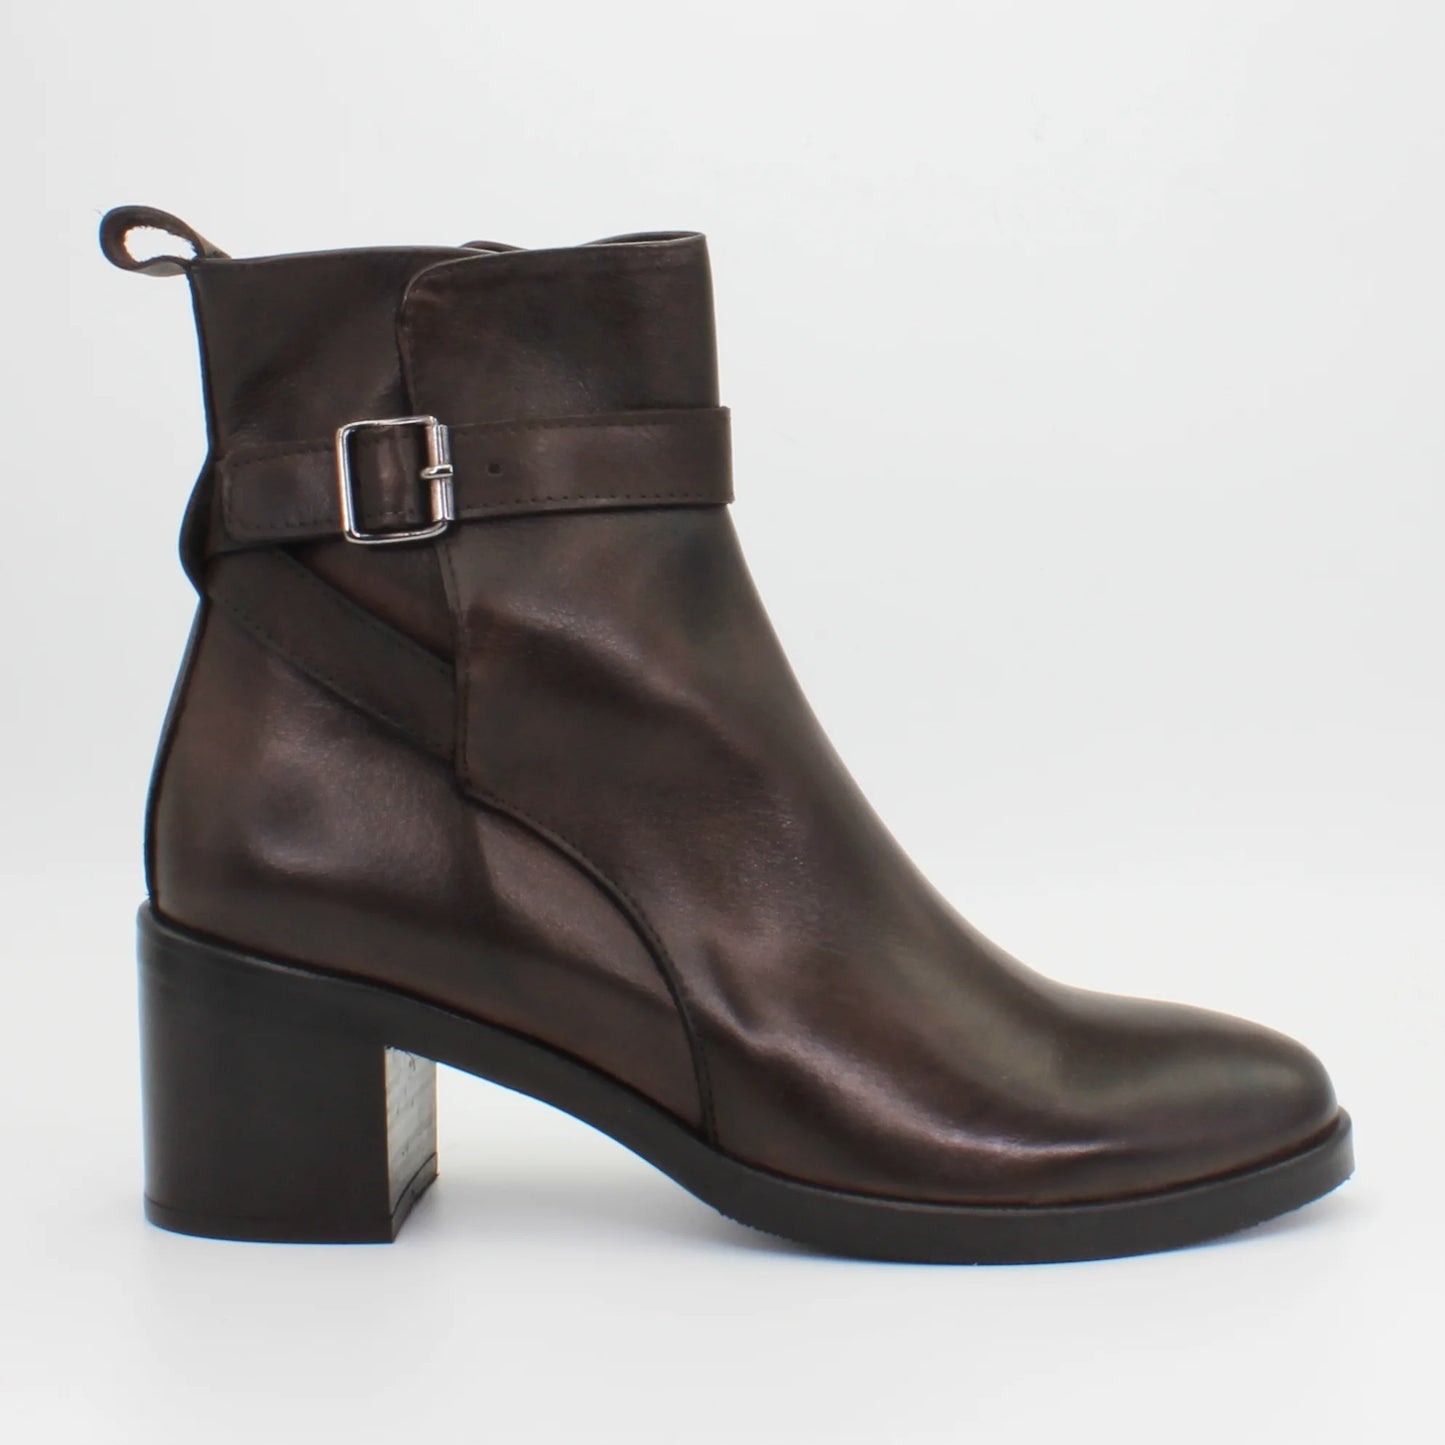 Shop Handmade Italian Leather Boot in Testa Di Moro (GC2560) or browse our range of hand-made Italian boots for women in leather or suede in-store at Aliverti Cape Town, or shop online. We deliver in South Africa & offer multiple payment plans as well as accept multiple safe & secure payment methods.